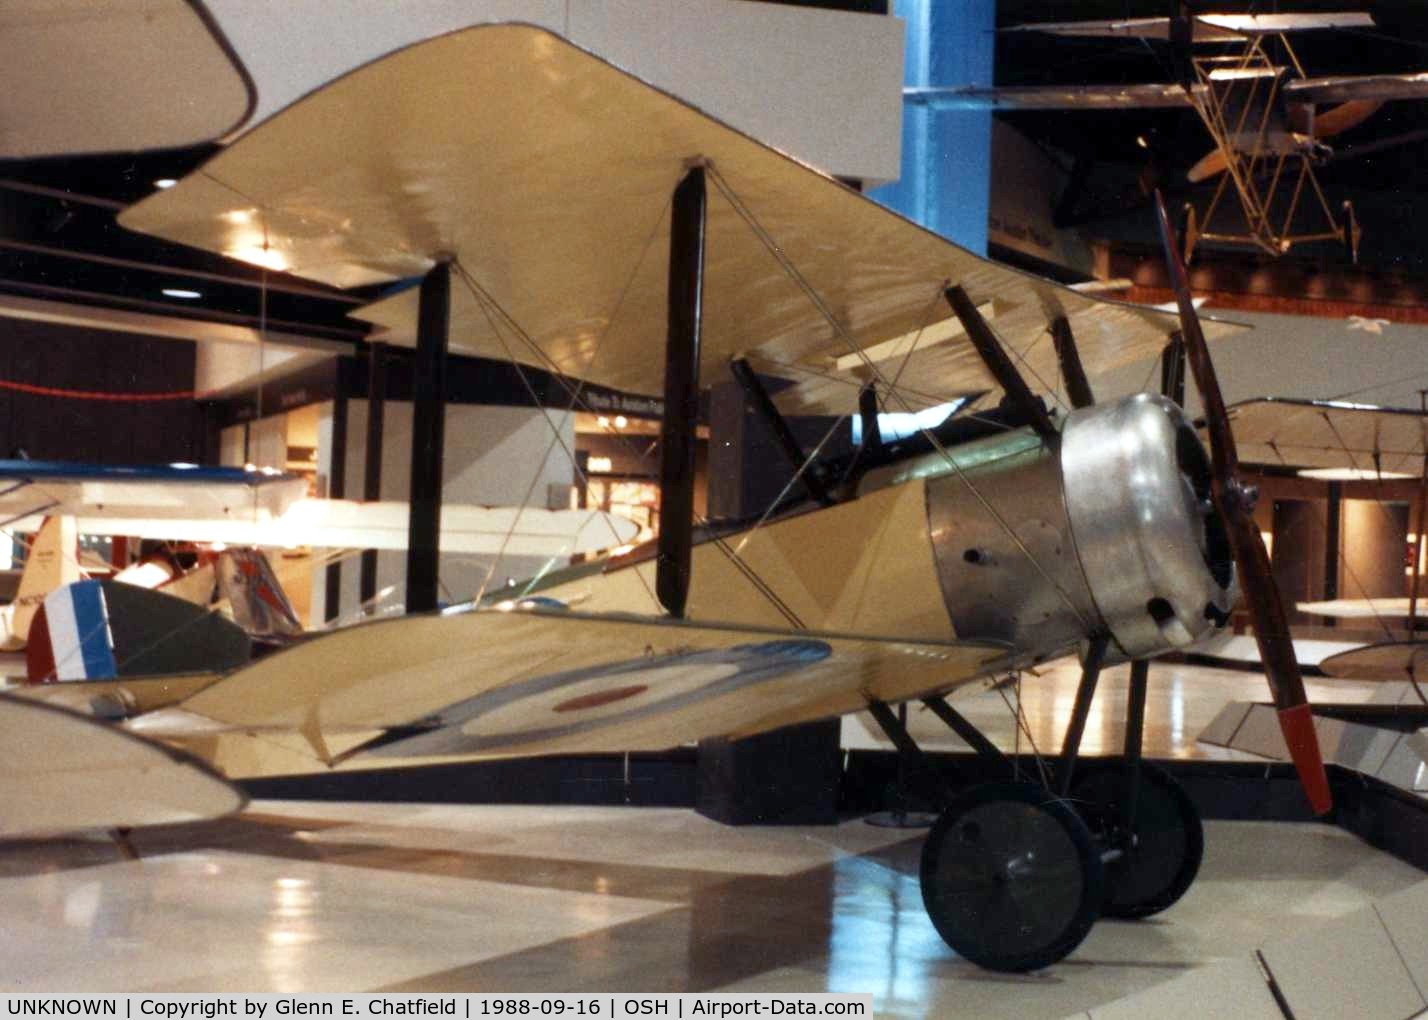 UNKNOWN, , Sopwith Pup - possibly a replica - at the EAA Museum